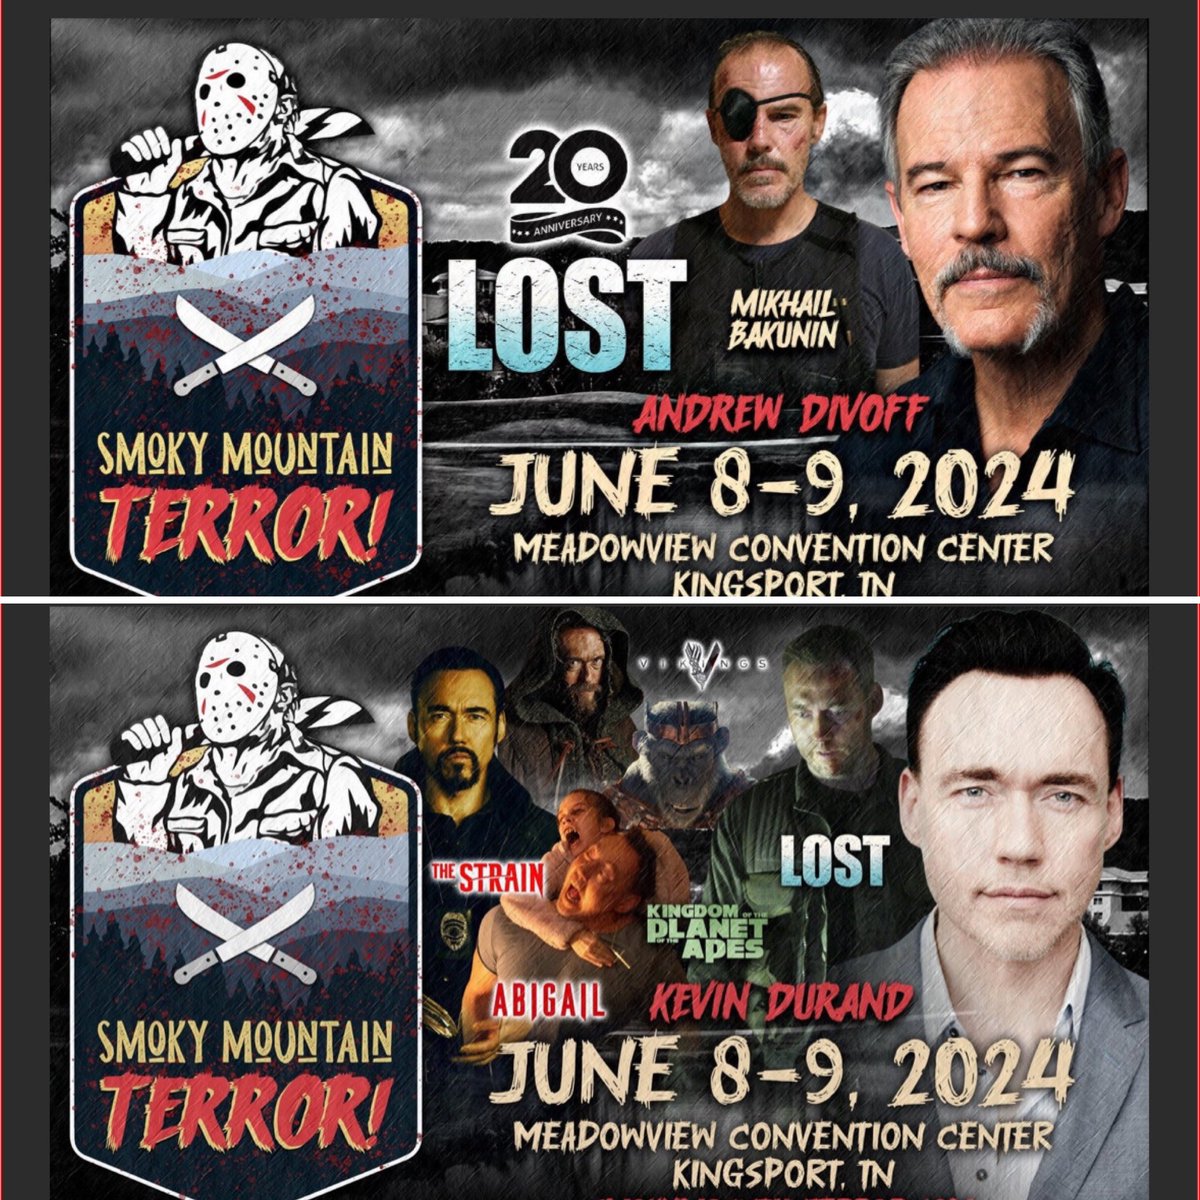 ONE month from today join Ian and some of his #LOST cast mates at #SmokeyMountainTerrorCon in Tennessee! June 8 and 9!!  smokymountainterror.com
#HenryIanCusick #MaggieGrace #JeremyDavies #MalcolmDavidKelley
 #AndrewDivoff
#KevinDurand